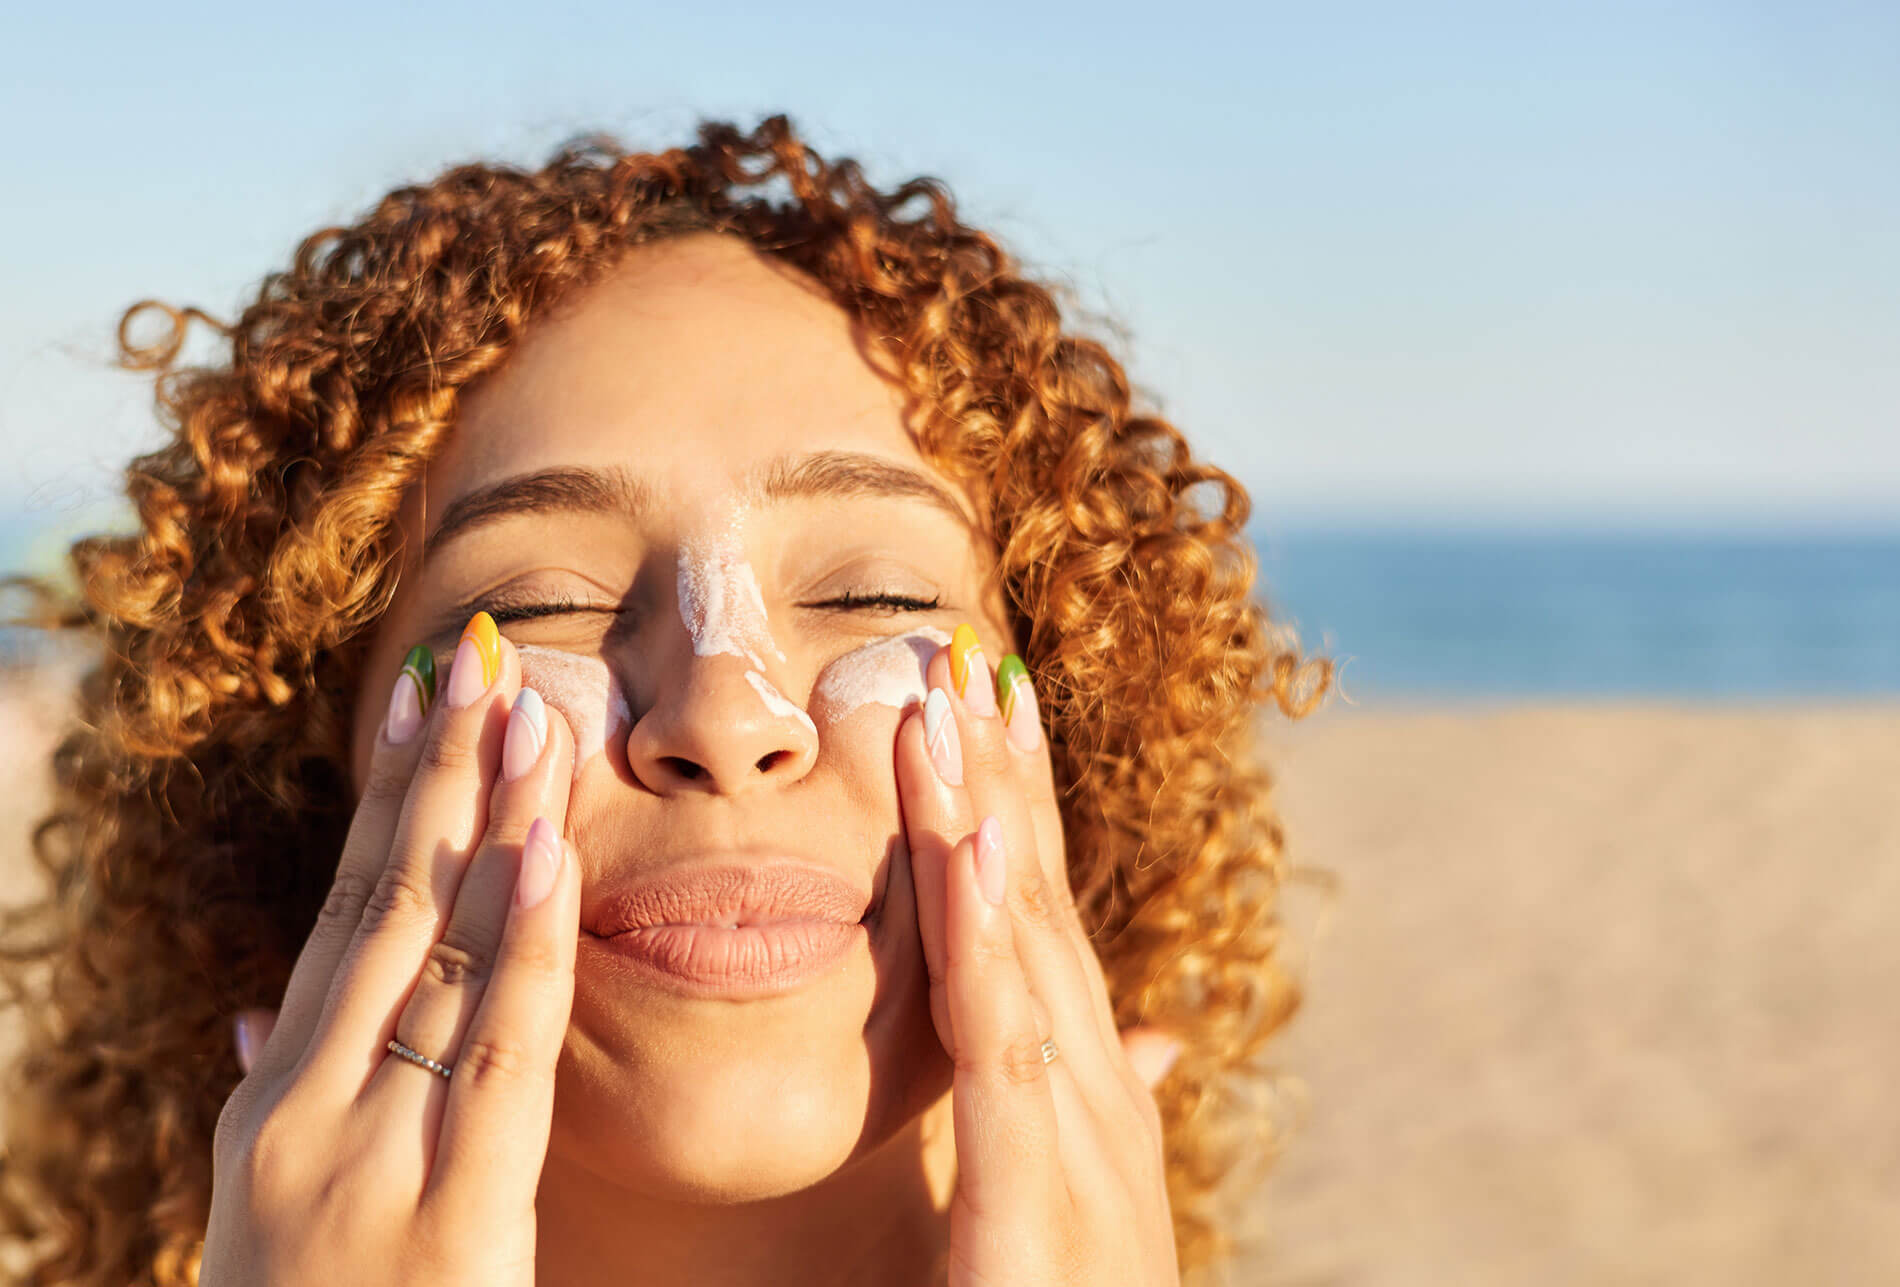 Best Sunscreen for The Face. Smiling happy woman applying sunscreen to her face on the beach at sunset. stock photo.